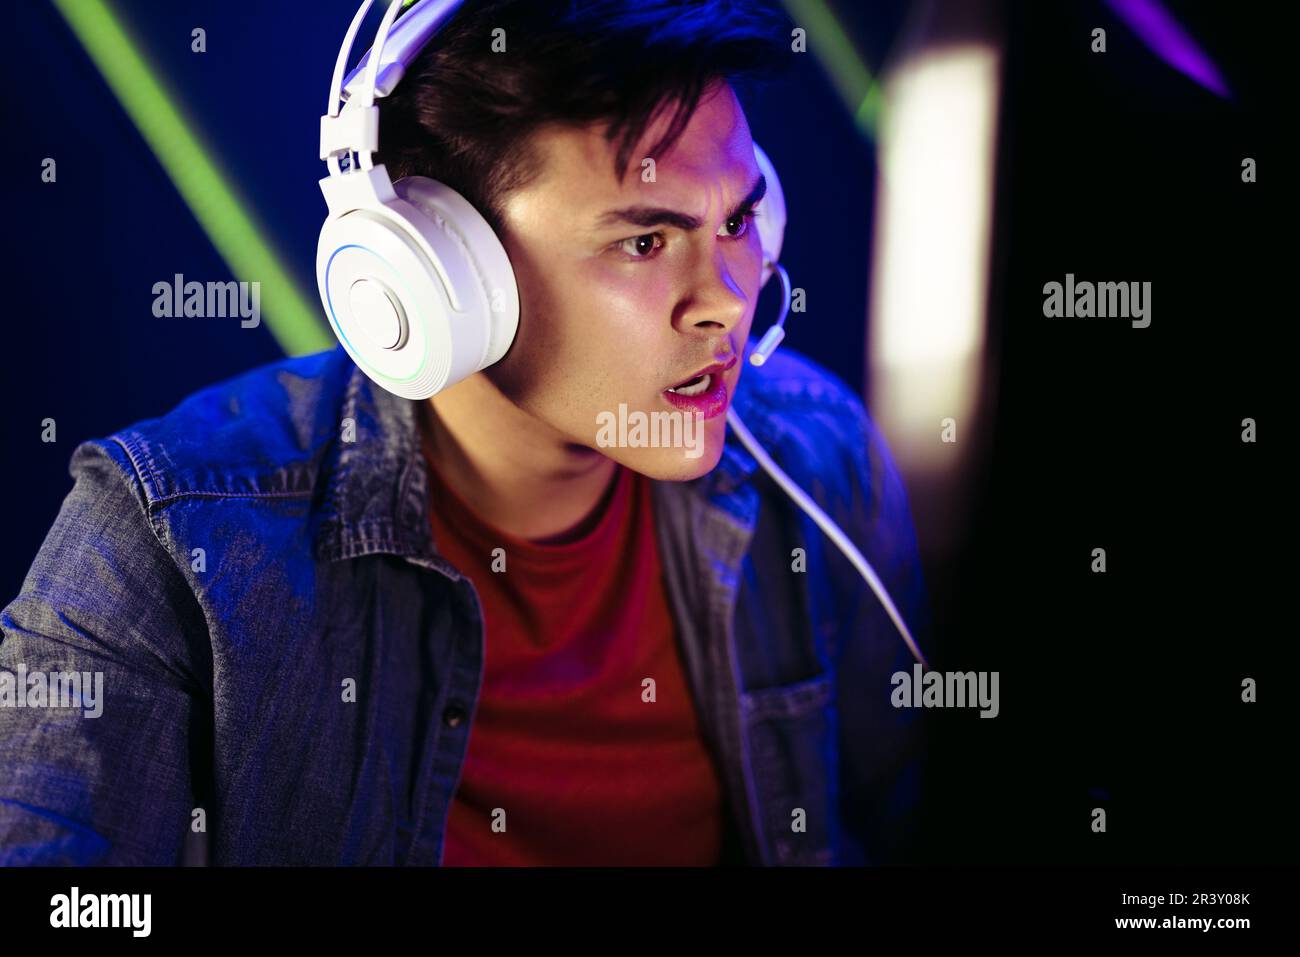 Gamer staring at the computer screen with an expression of shock and disbelief, trying to get a closer look at what he’s seeing in this intense moment Stock Photo